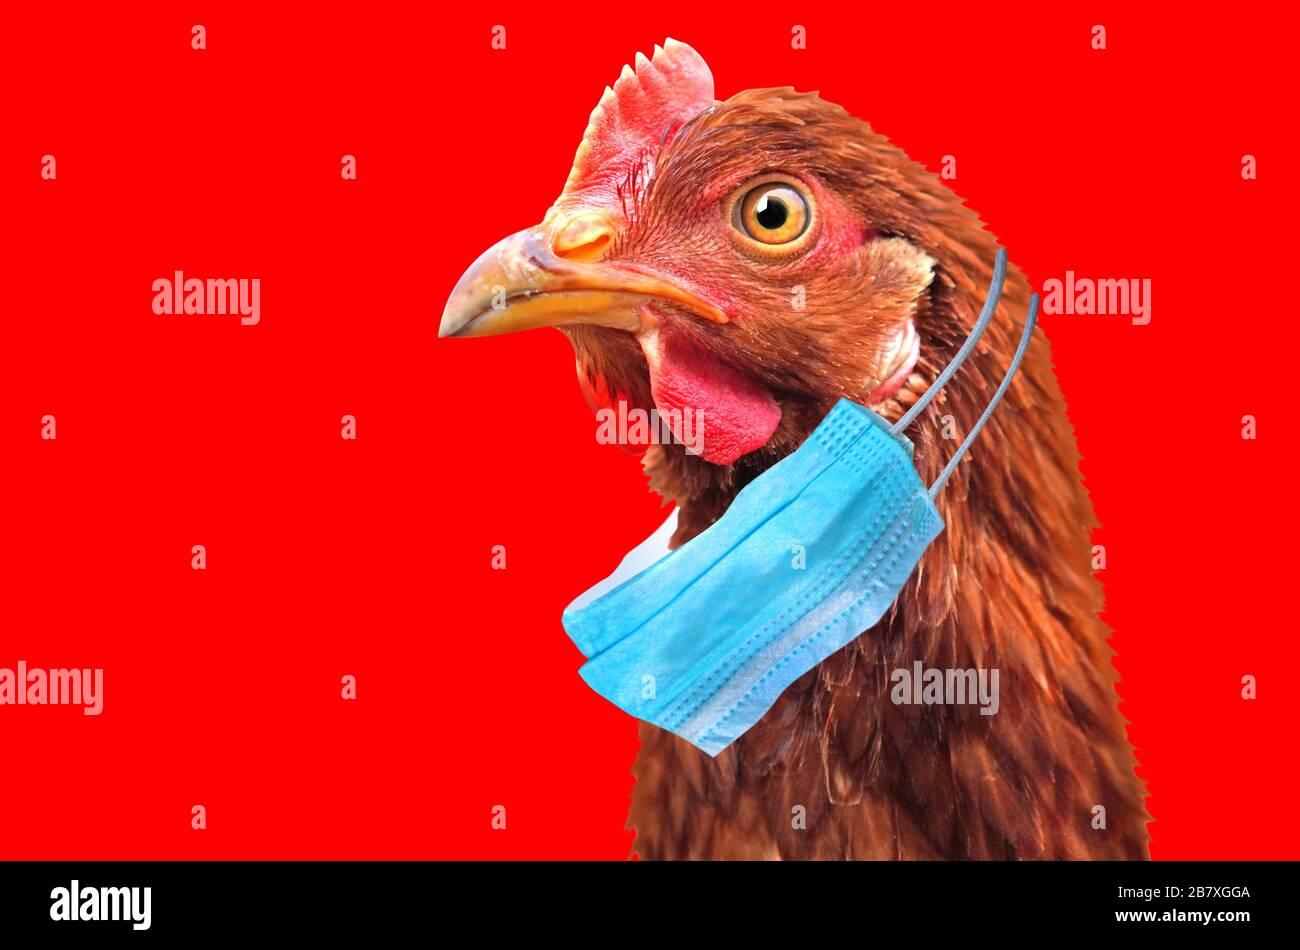 Bird flu H5N1 in China concept with chicken portrait and medical protective mask. Stock Photo